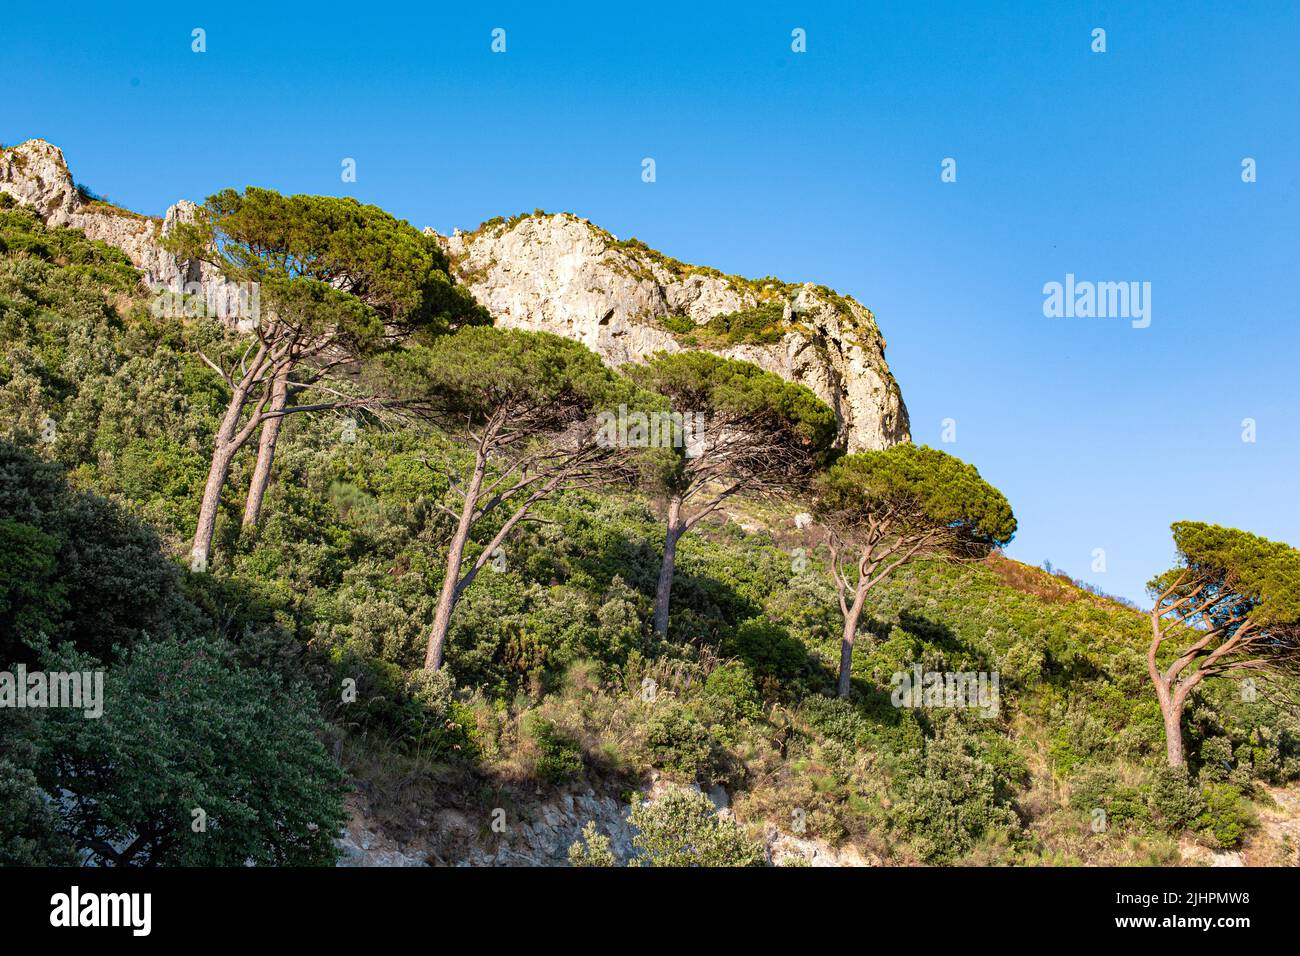 Mediterranean landscape with cliffs, trees and blue sky Stock Photo